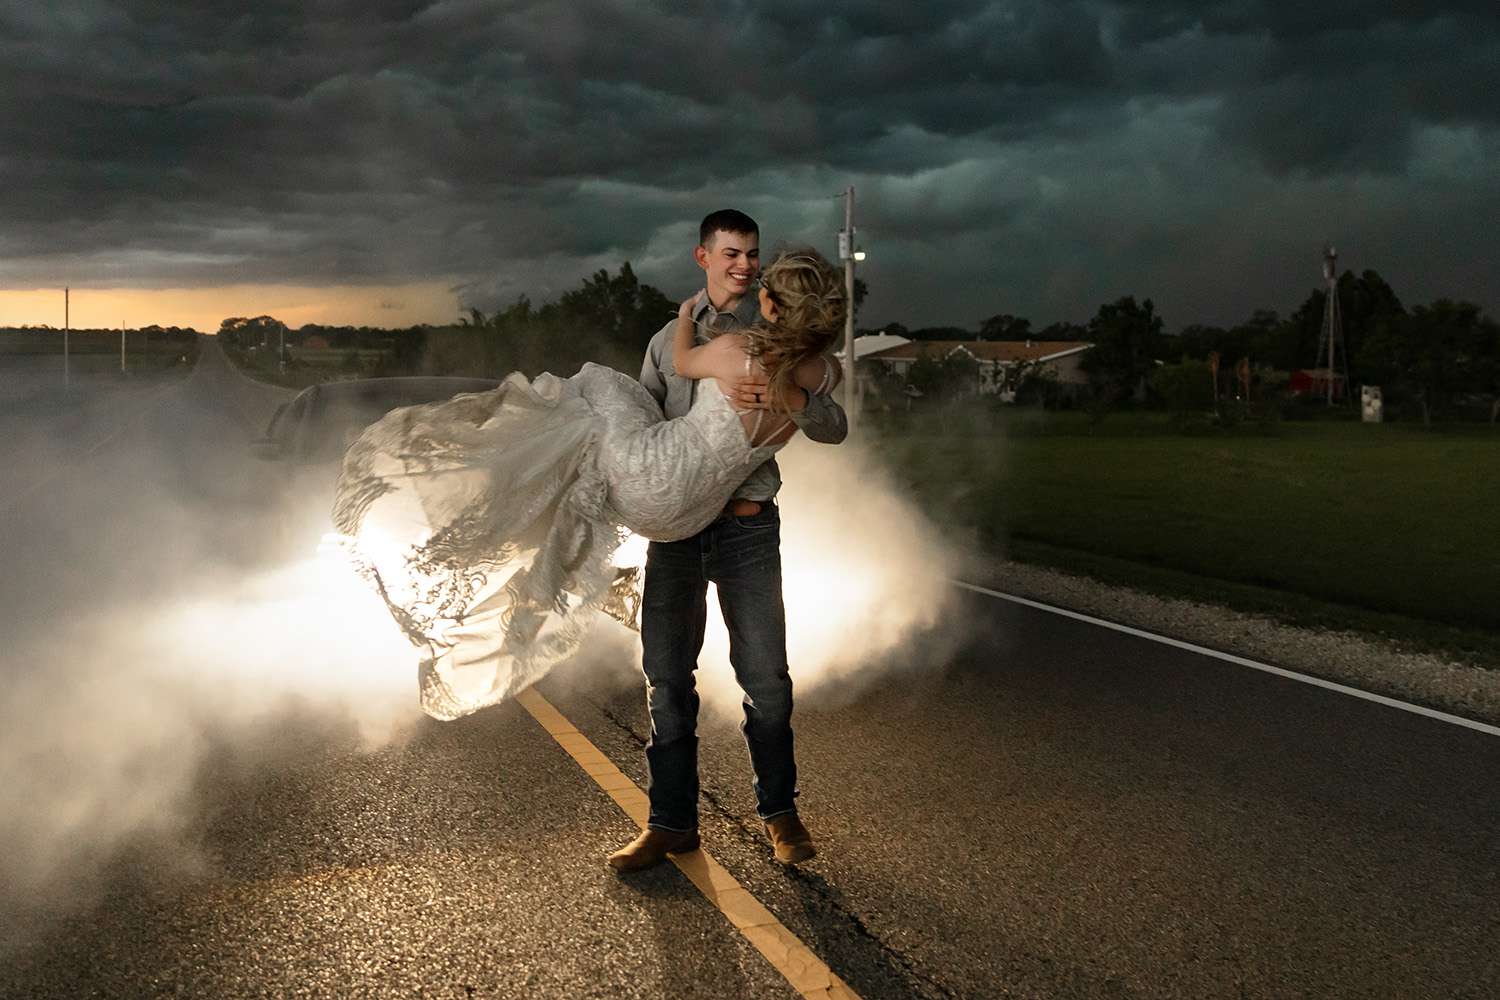 Newlyweds Pose for Dramatic Wedding Photos Outside as Thunderstorm Approaches